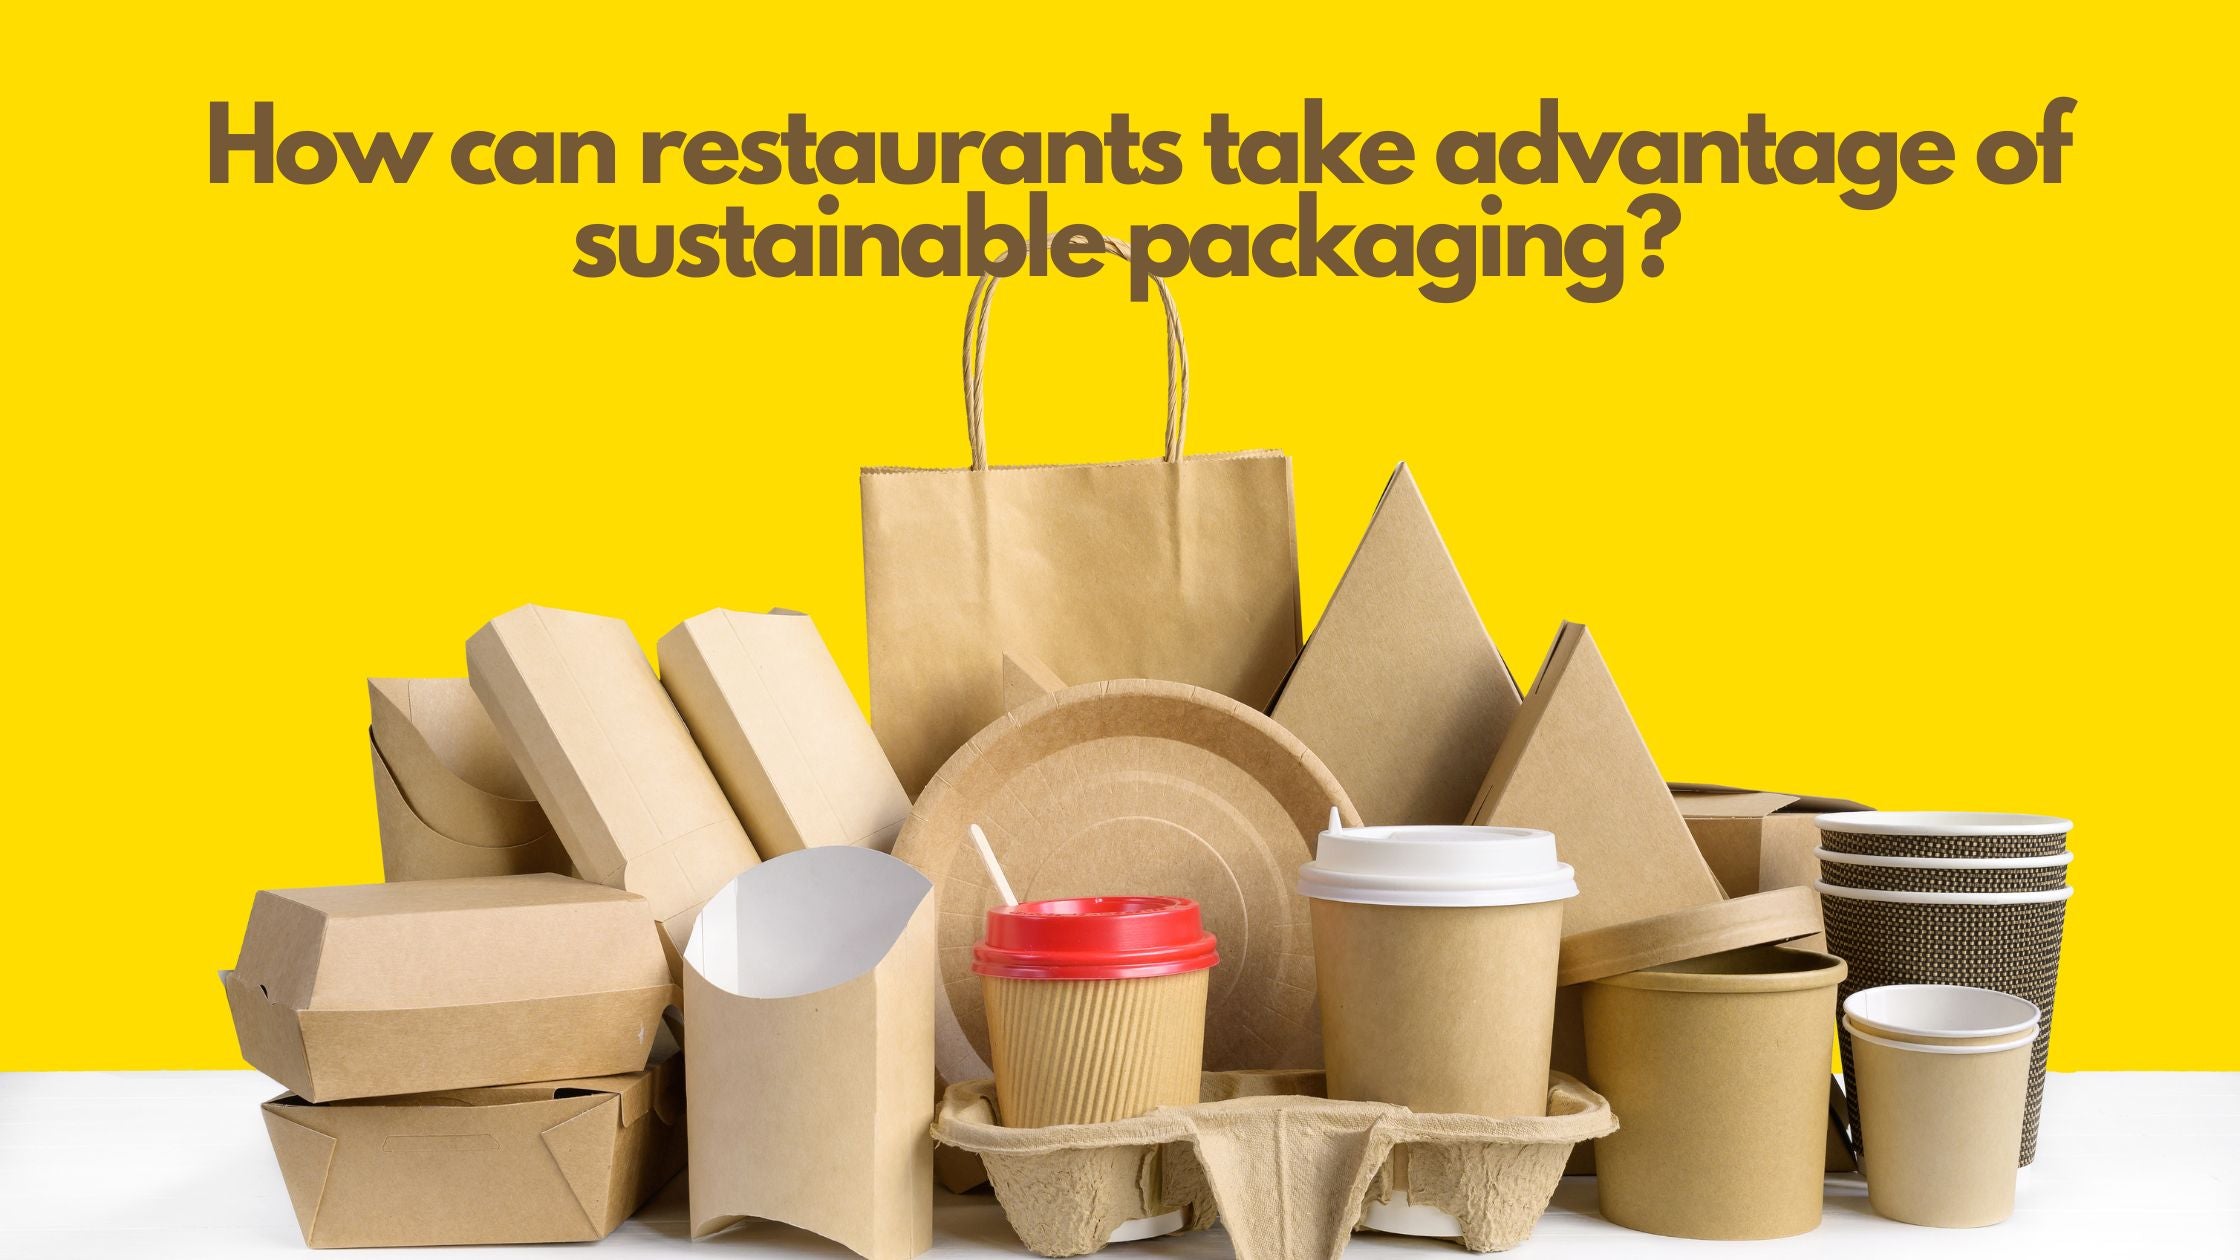 How can restaurants take advantage of sustainable packaging?